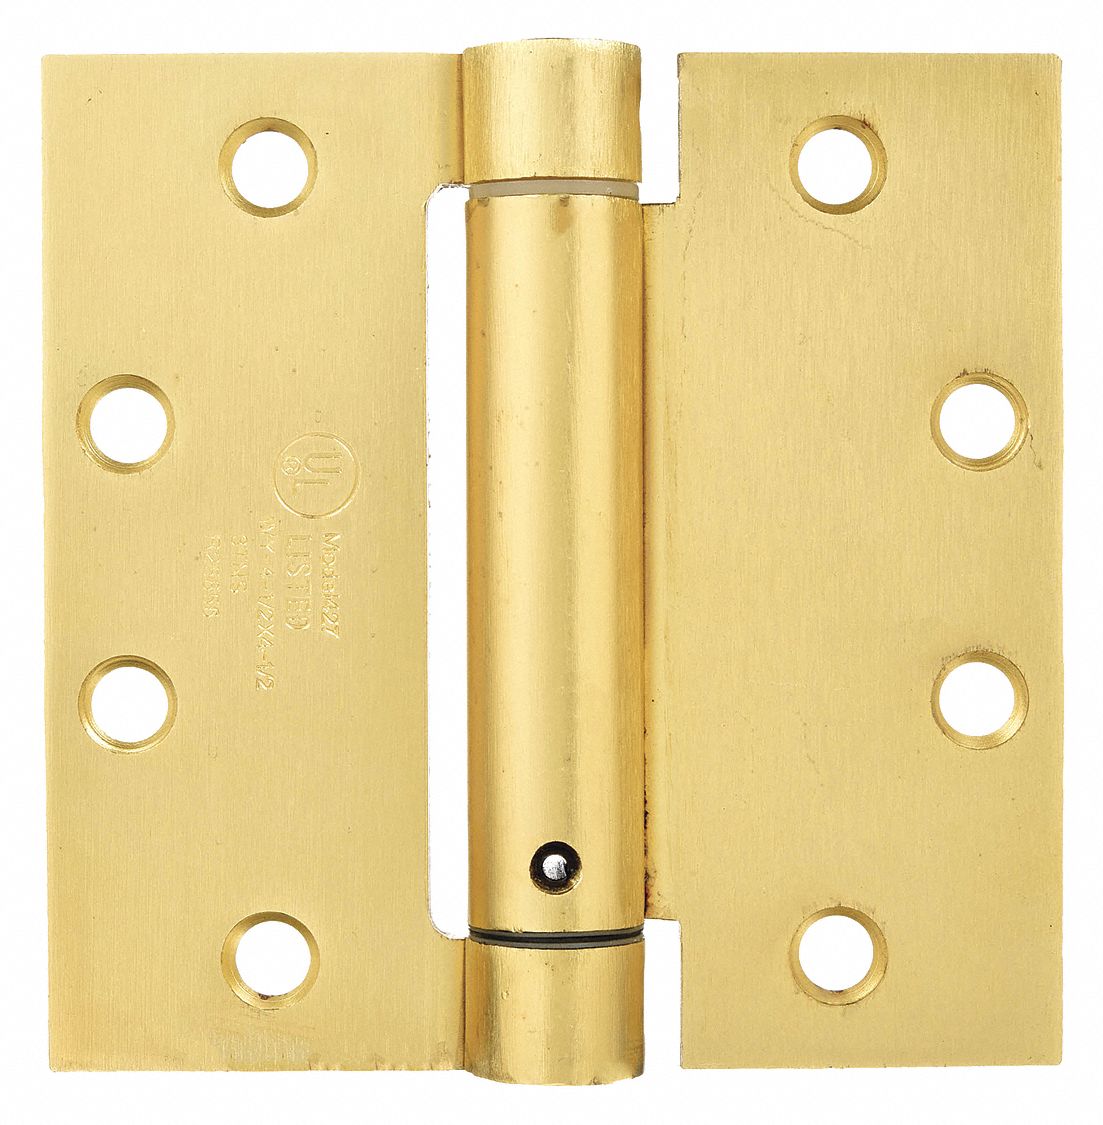 20Pcs Mini Brass Hinges 1/4in 4 Hole Folding Small Hinge with